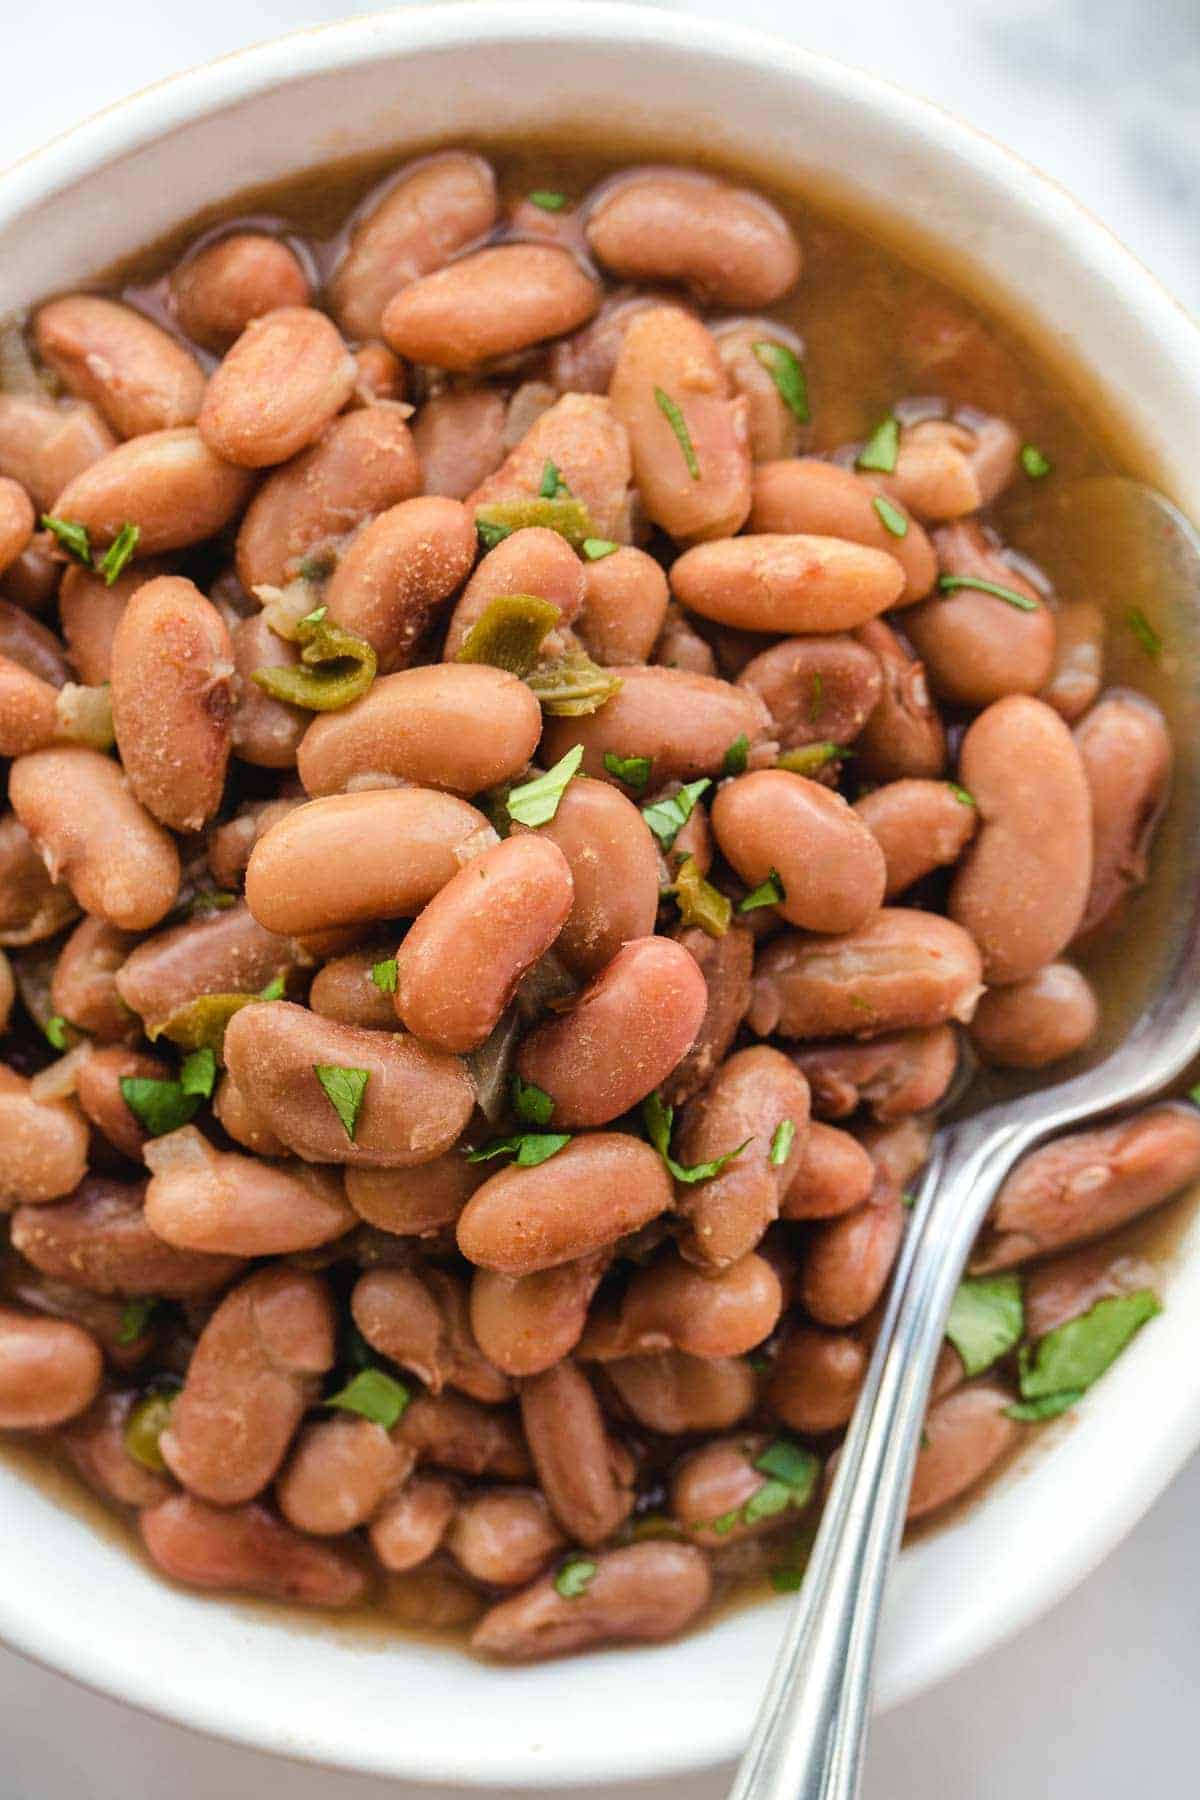 A close up of cooked pinto beans in a bowl with a spoon, garnished with fresh chopped parsley